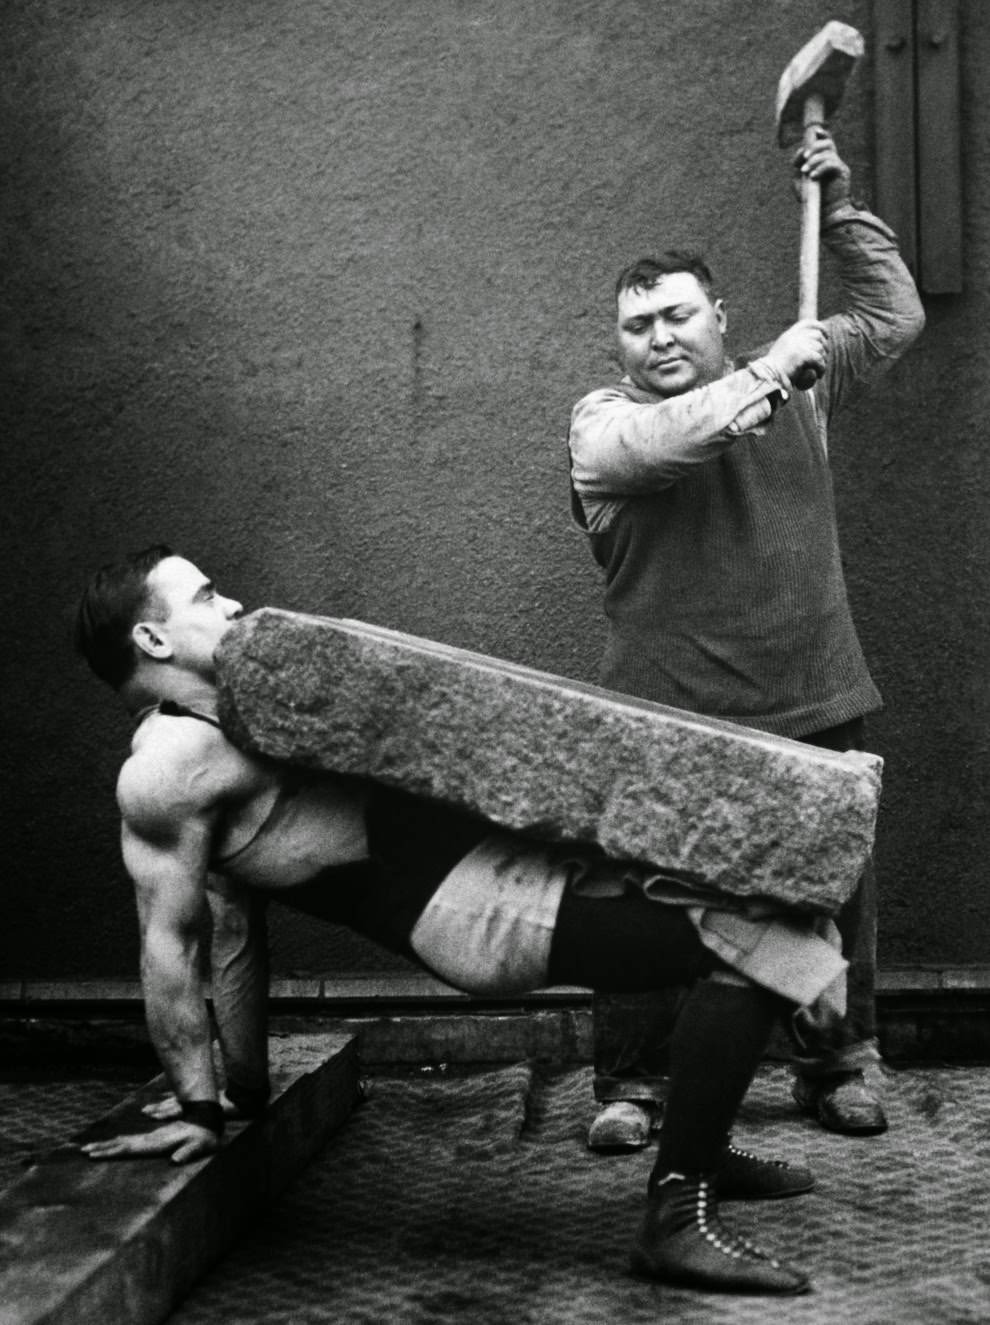 Man crushes a block placed on the stomach of a strongman, 1930